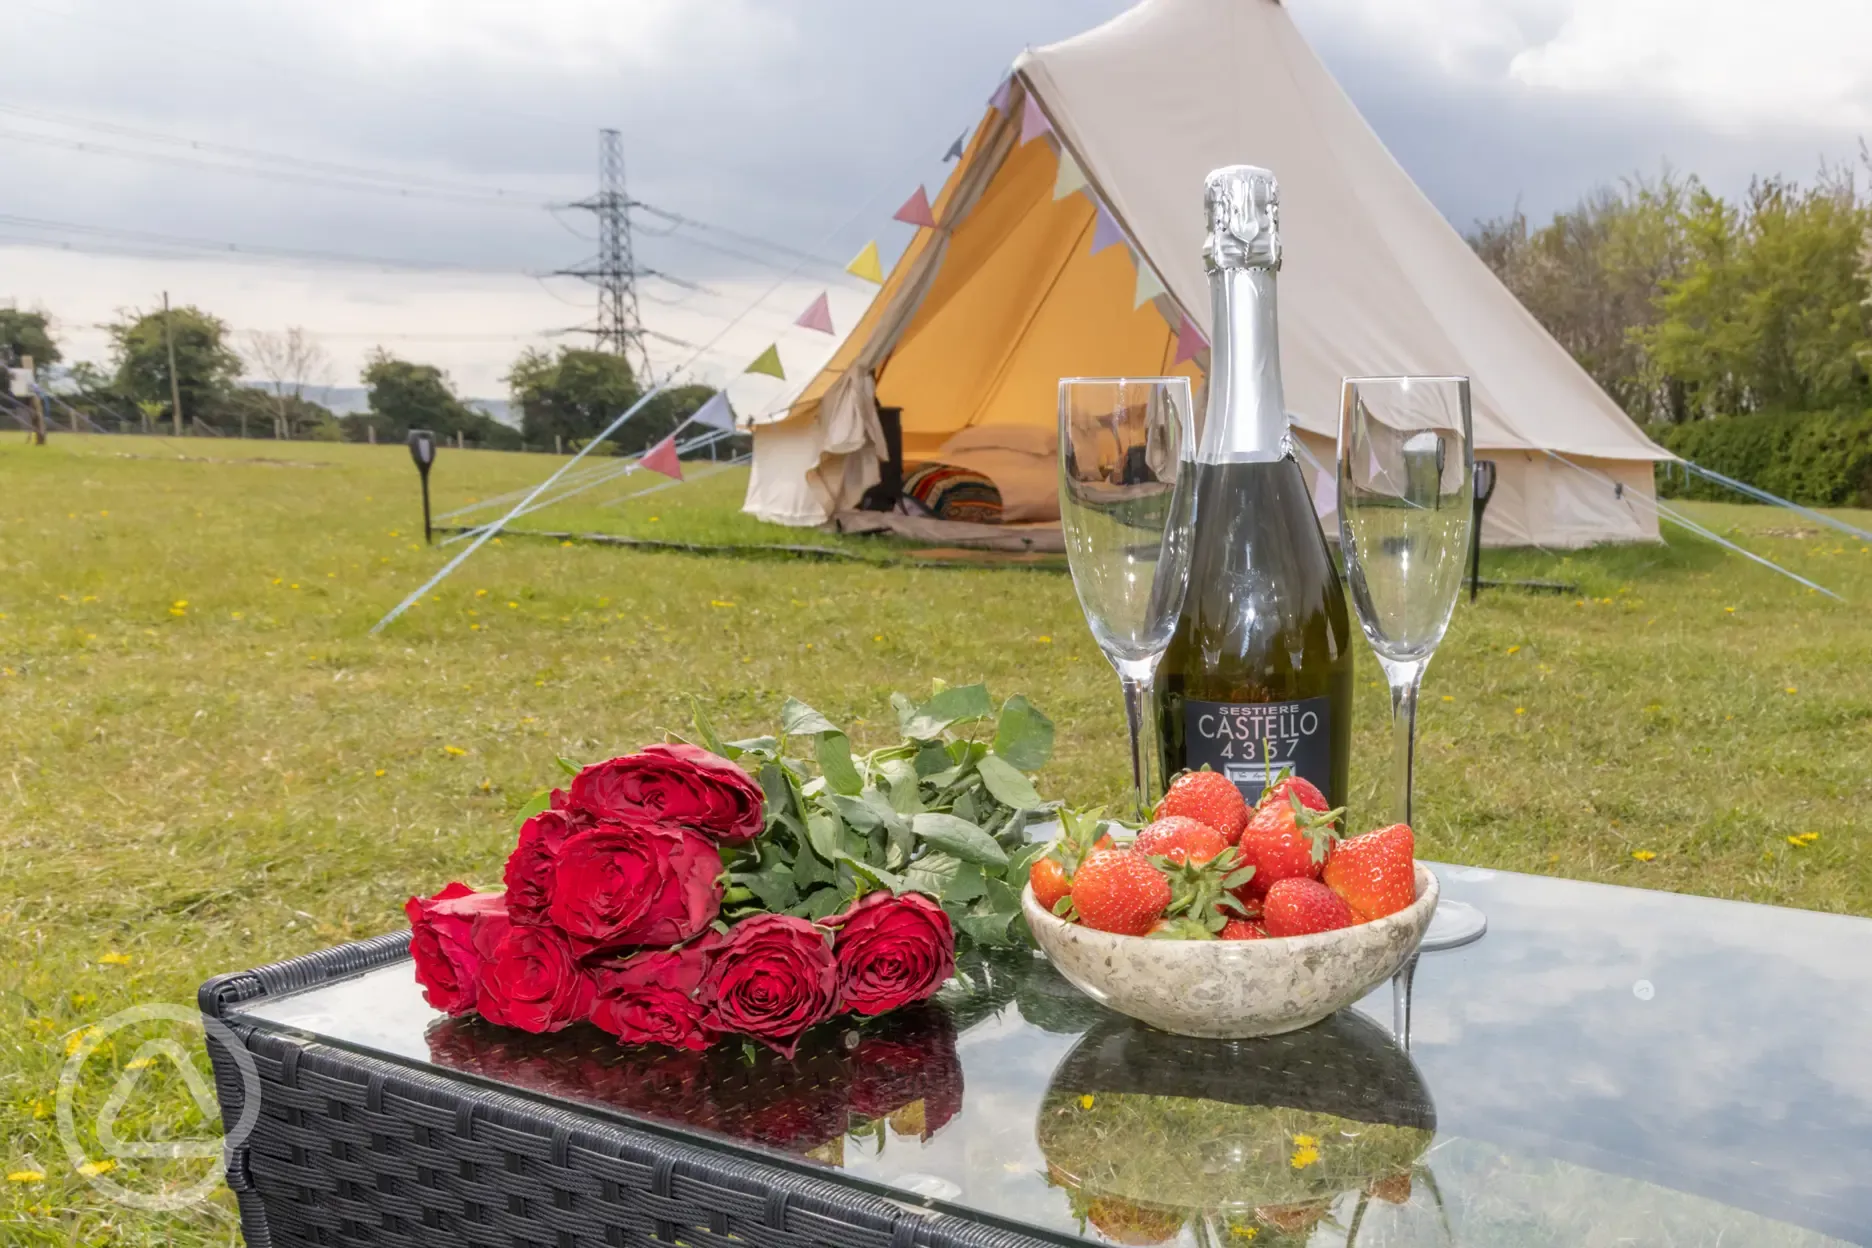 Glamping in style